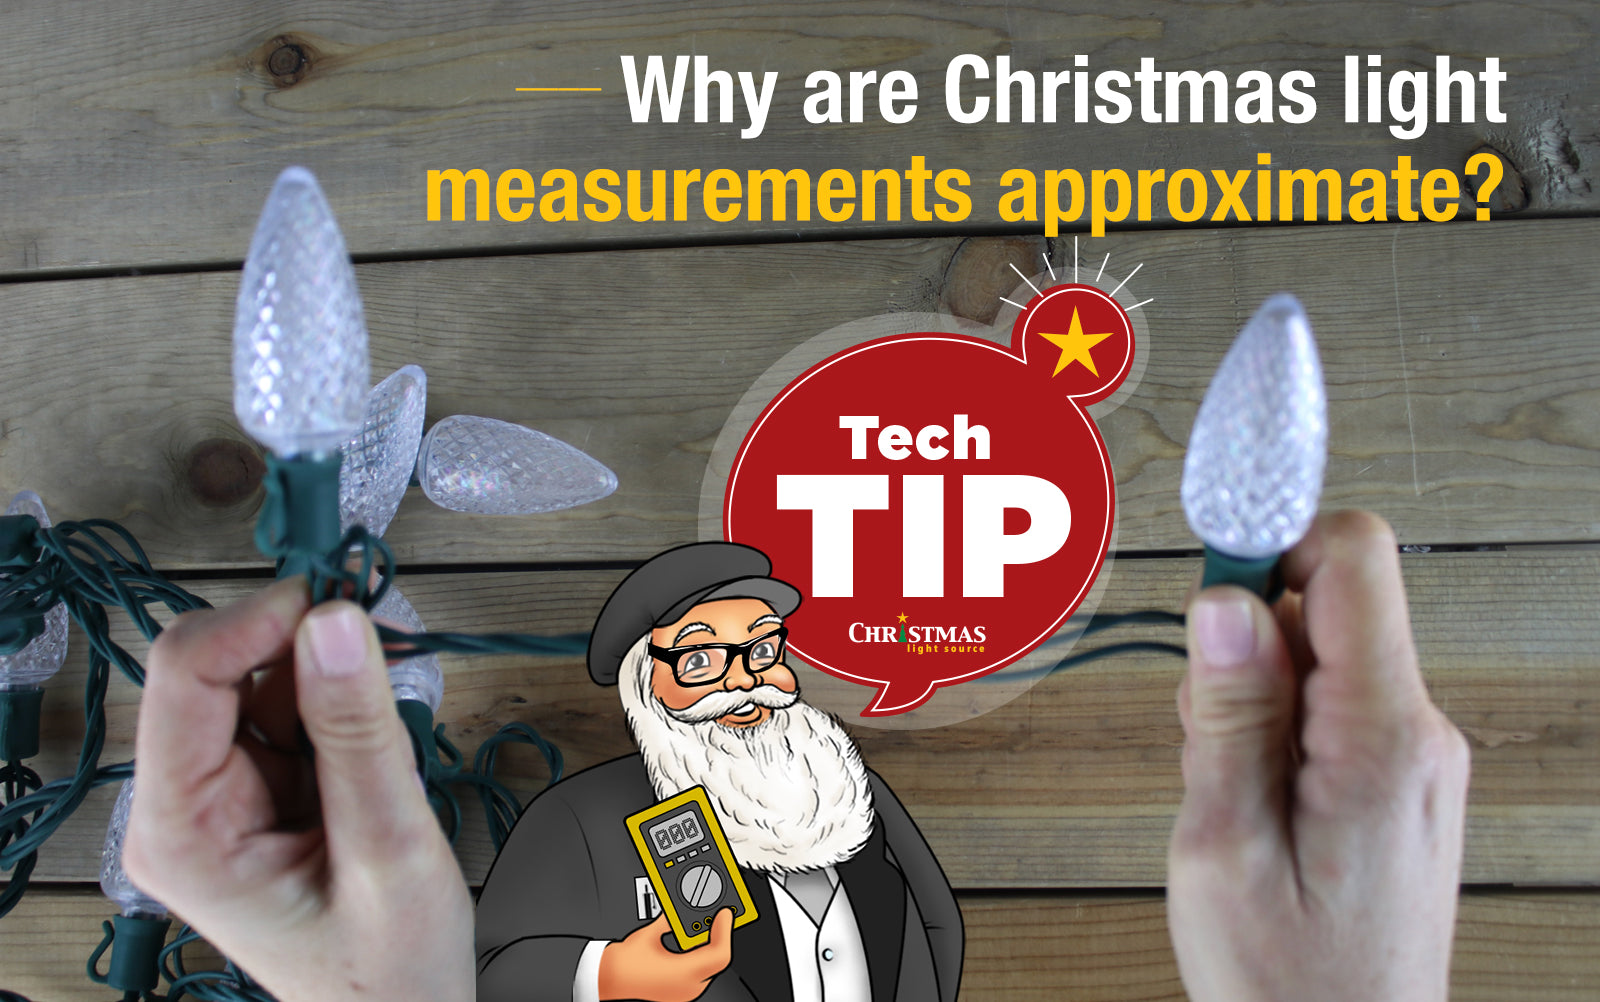 Why are Christmas light measurements approximate?